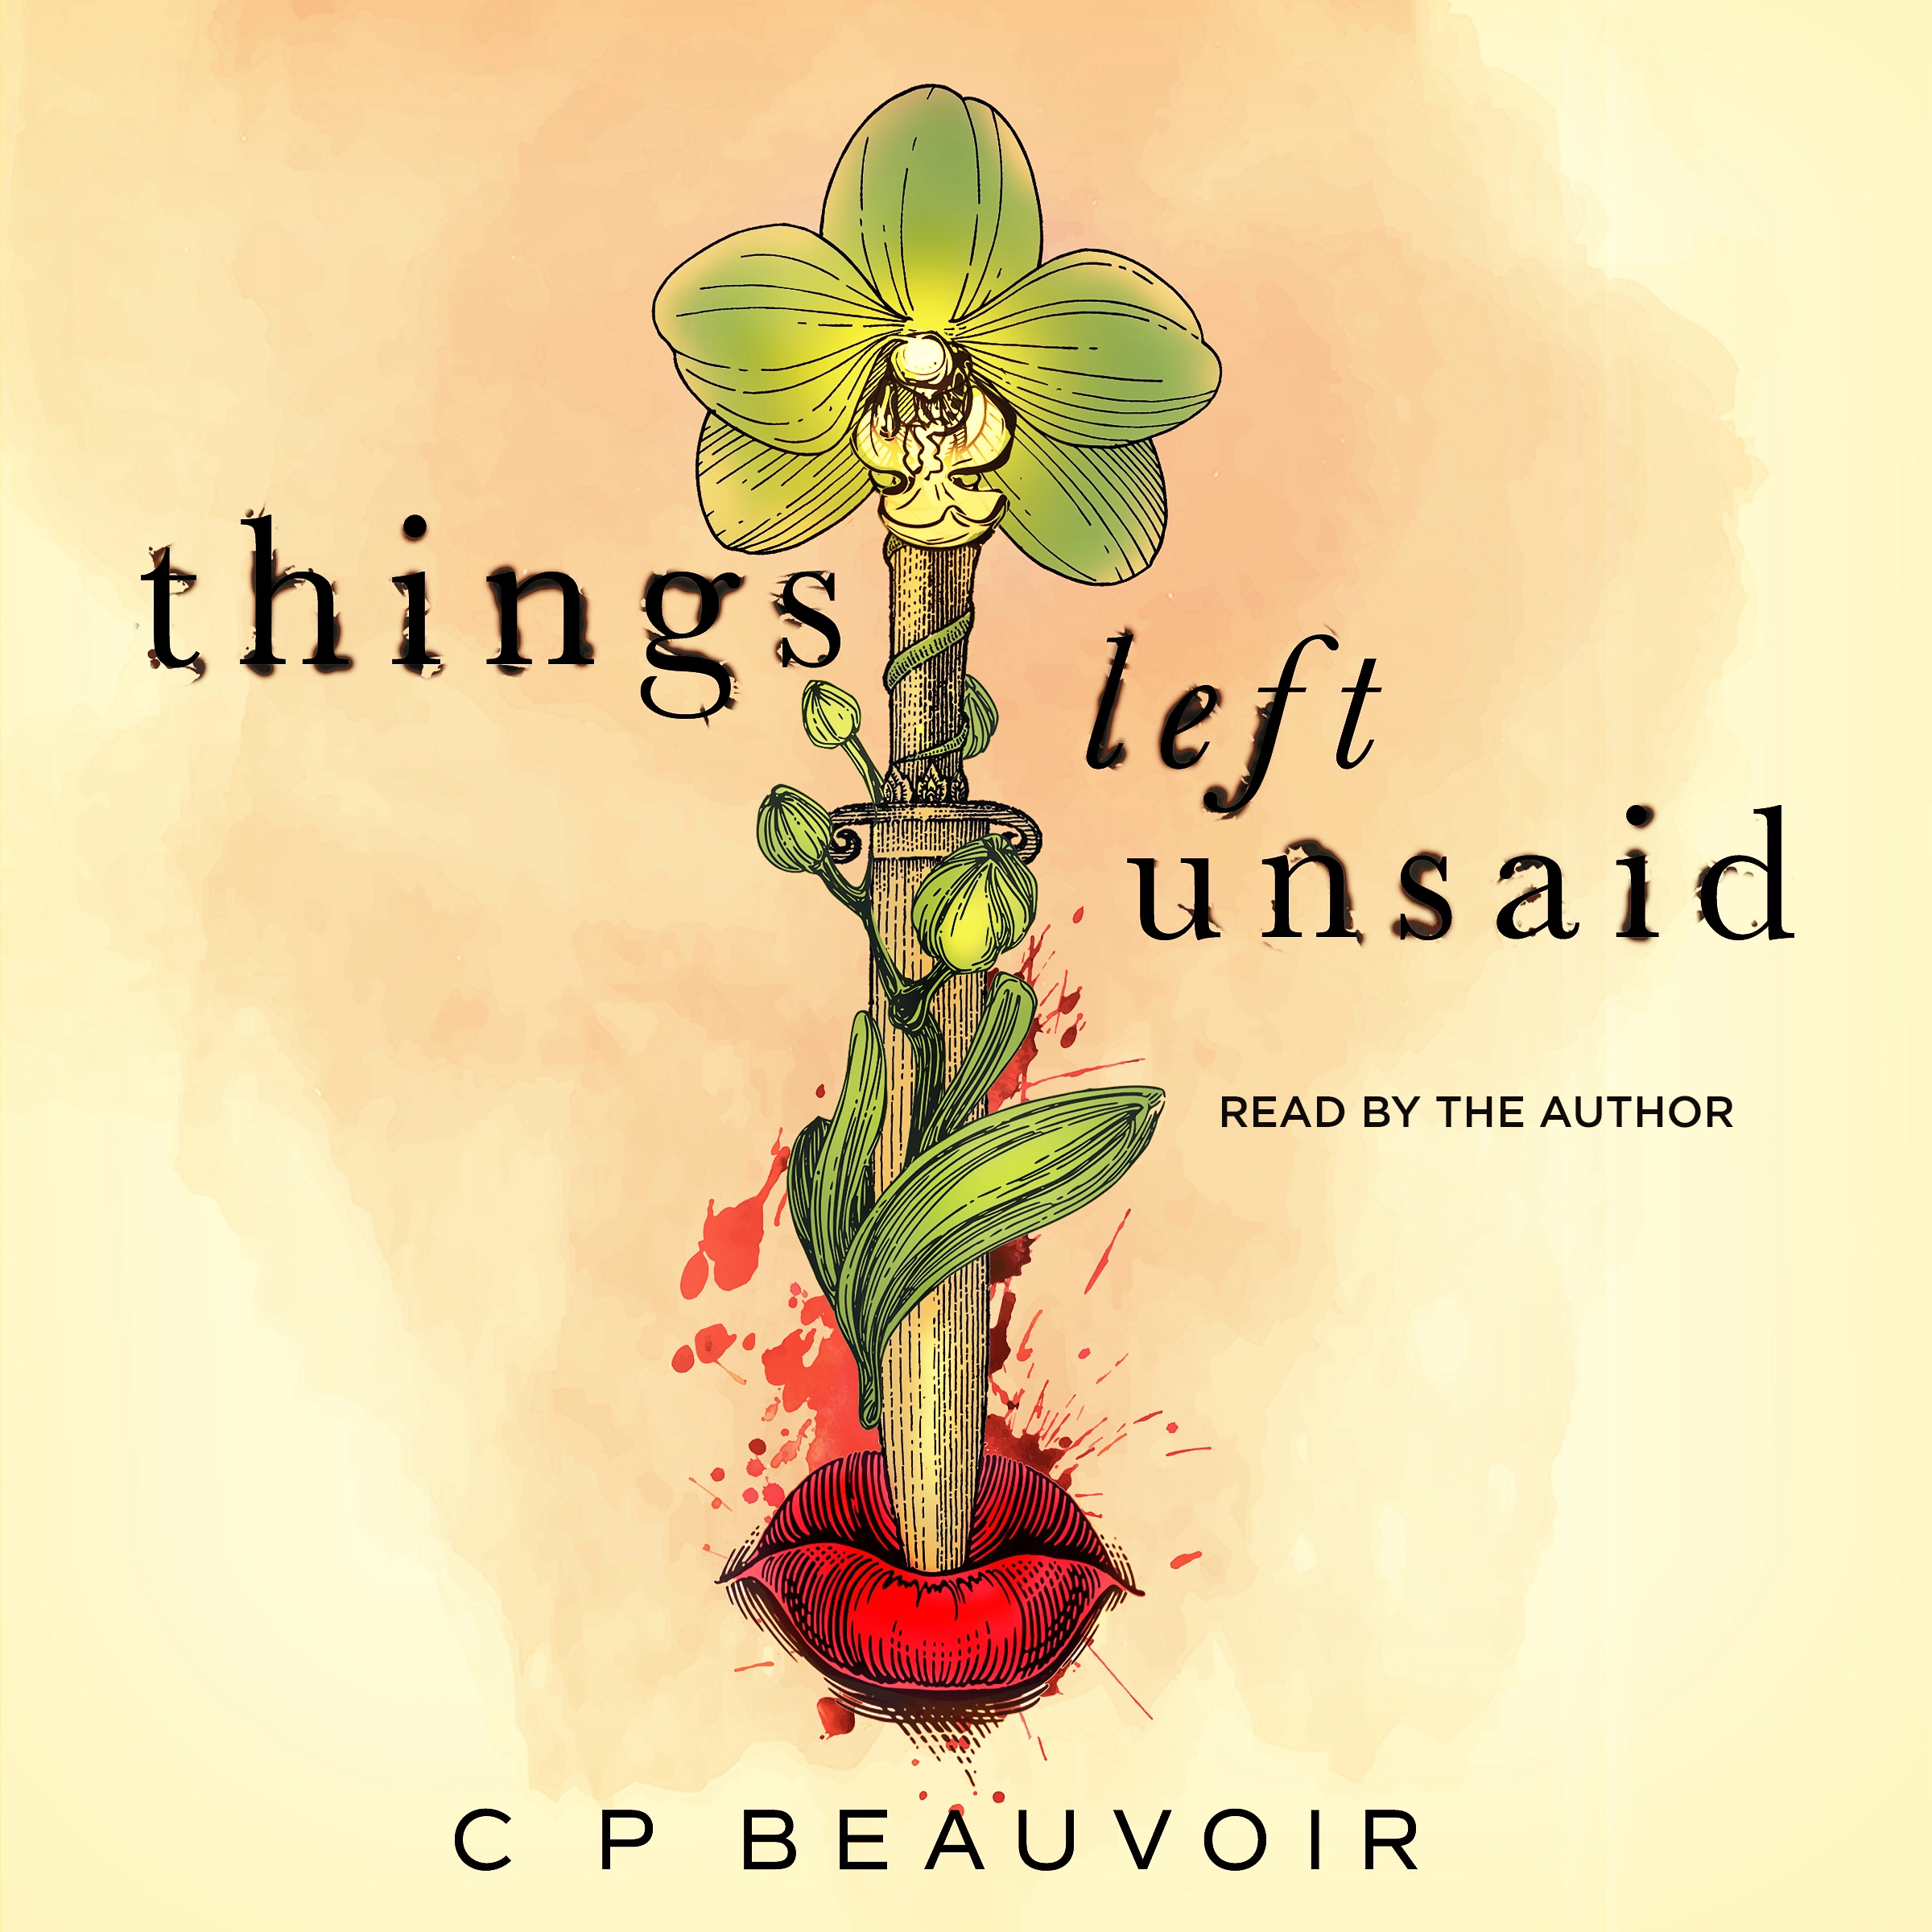 things left unsaid Audiobook by C P Beauvoir